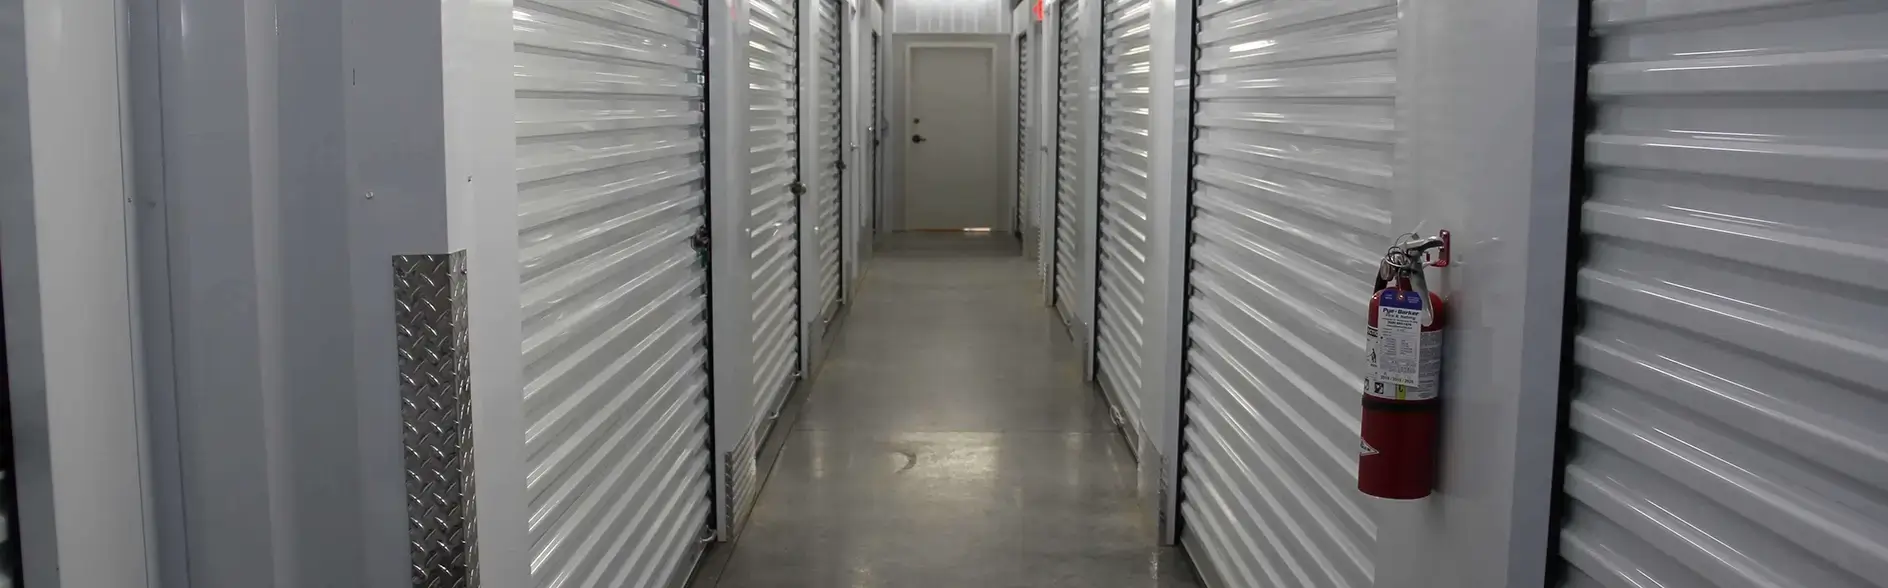 Storage Units, Climate Controlled Self Storage, Asheville NC, Self Storage, Asheville, NC